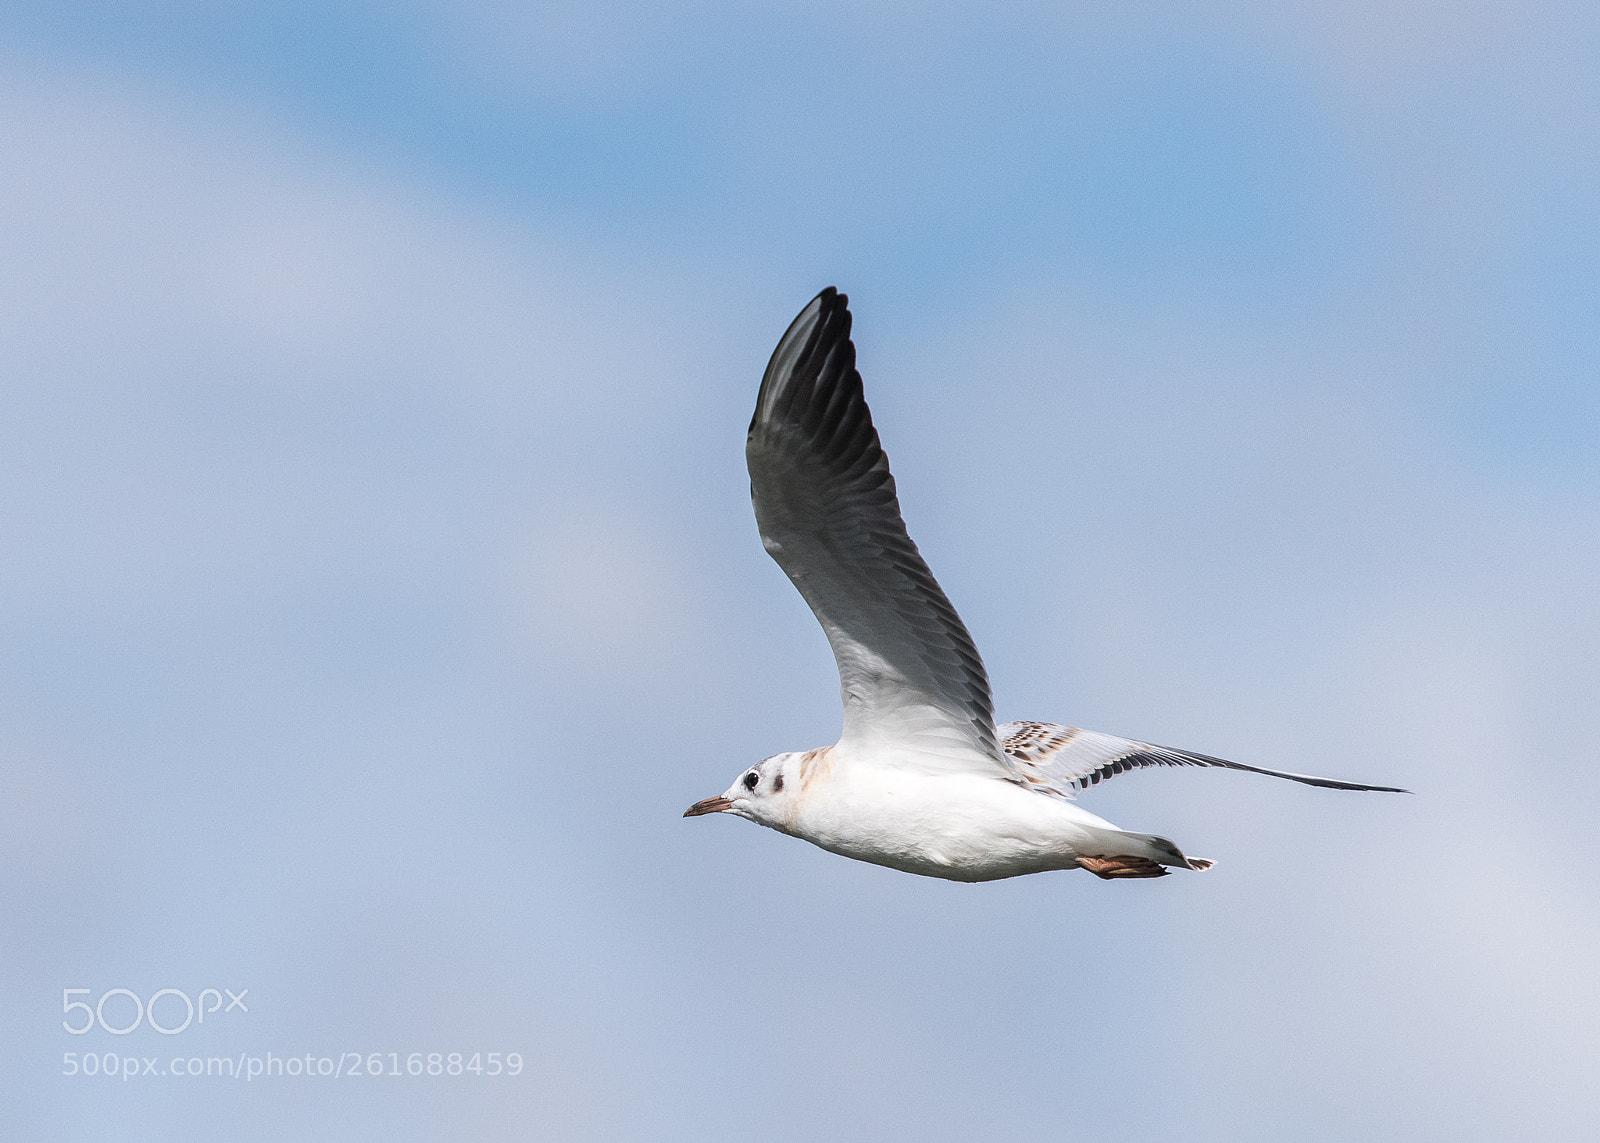 Nikon D810 sample photo. A seagull swoops past photography